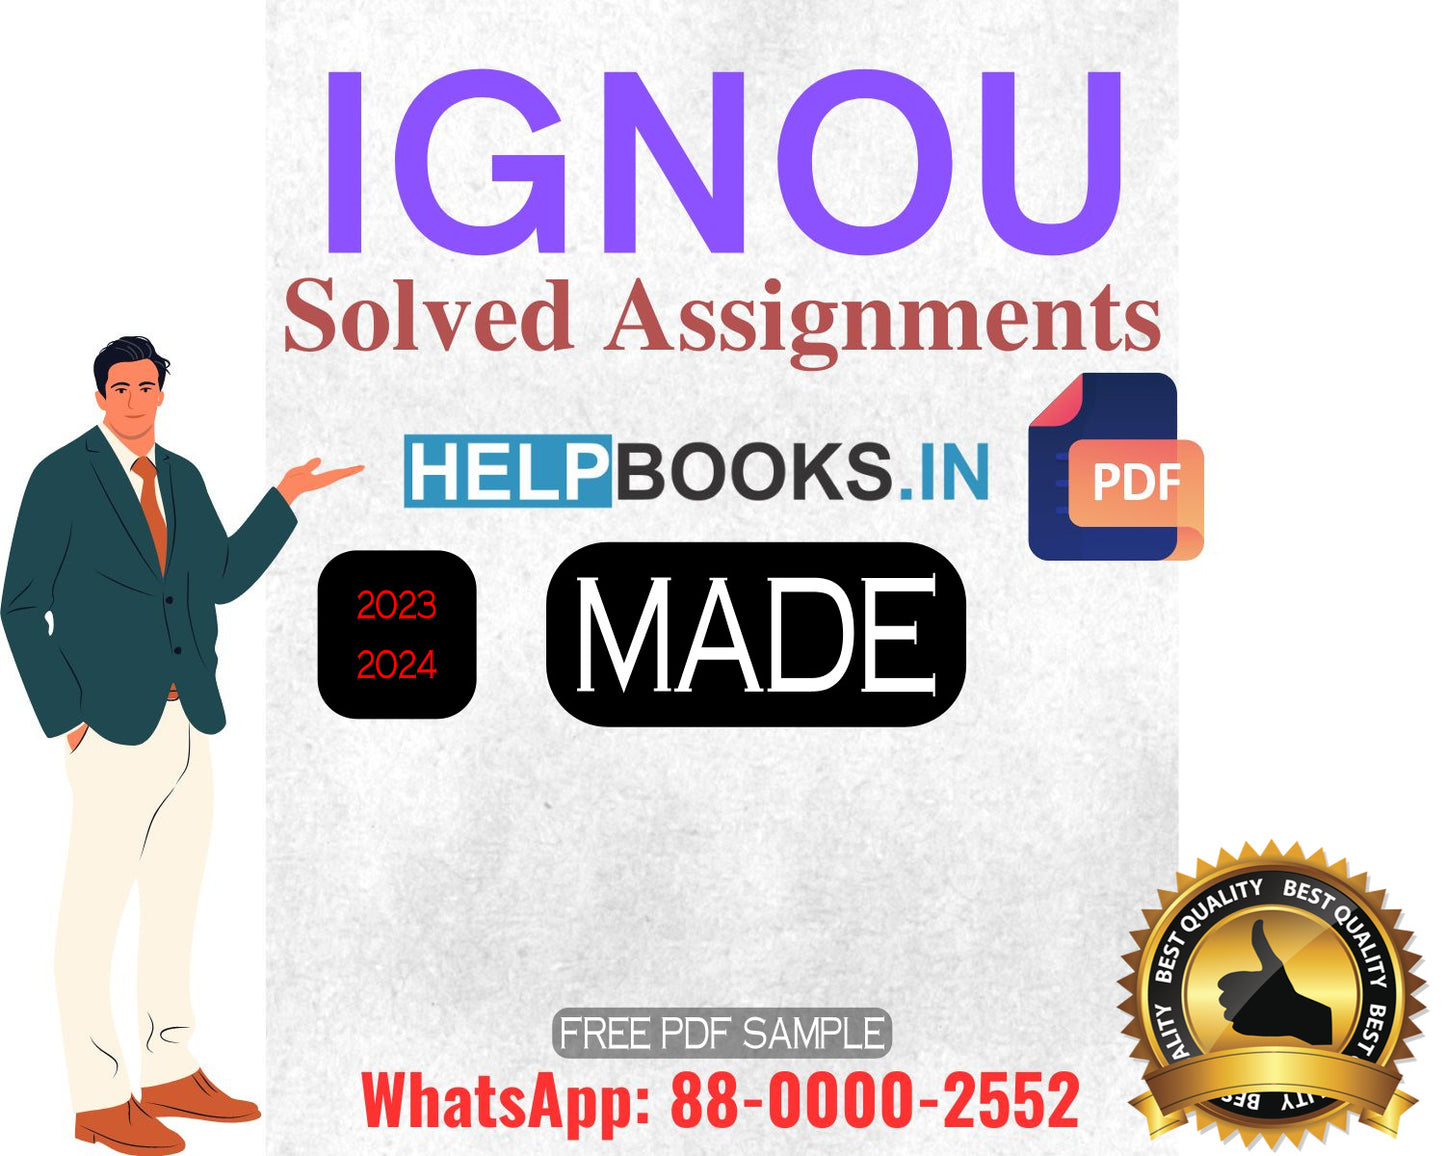 IGNOU Master's Degree Programme Latest IGNOU Solved Assignment 2023-24 & 2022-23 Sessions : MADE Master of Arts Distance Education Solved Assignments